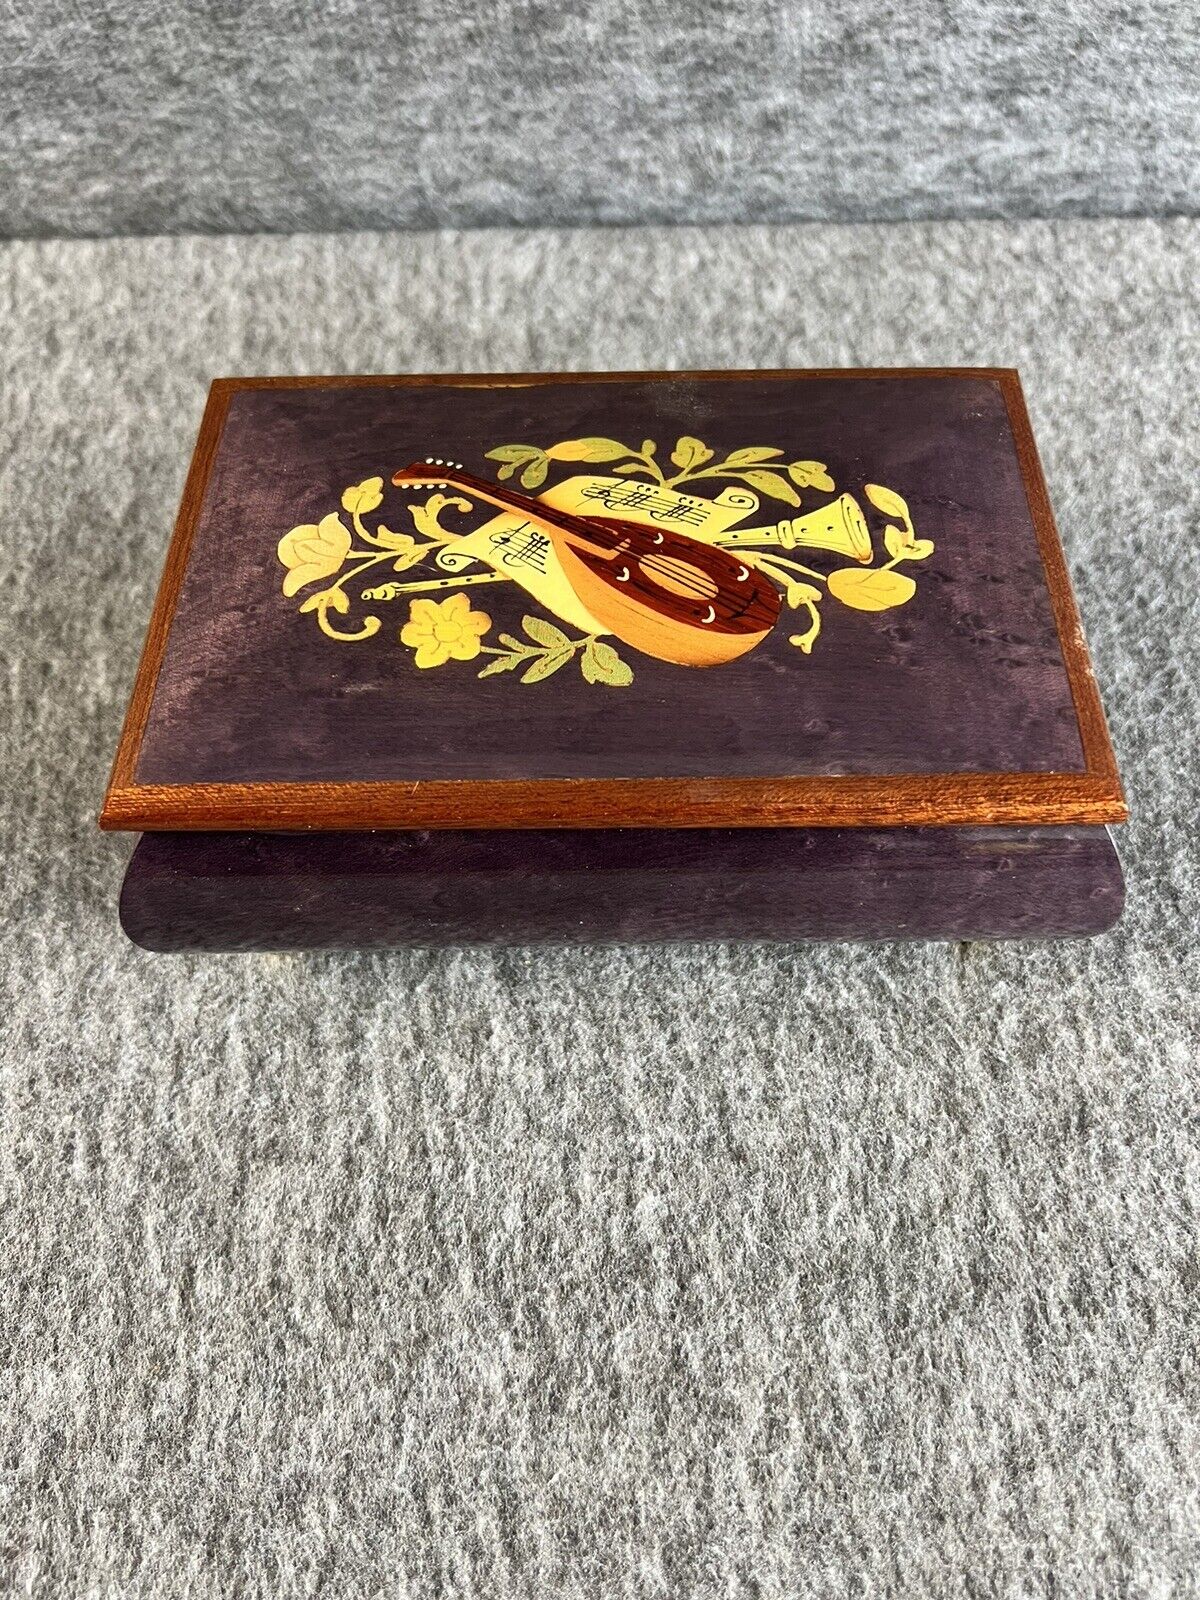 NEW Vintage Italian Wood Inlay Music Jewelry Box Footed with Musical Instruments